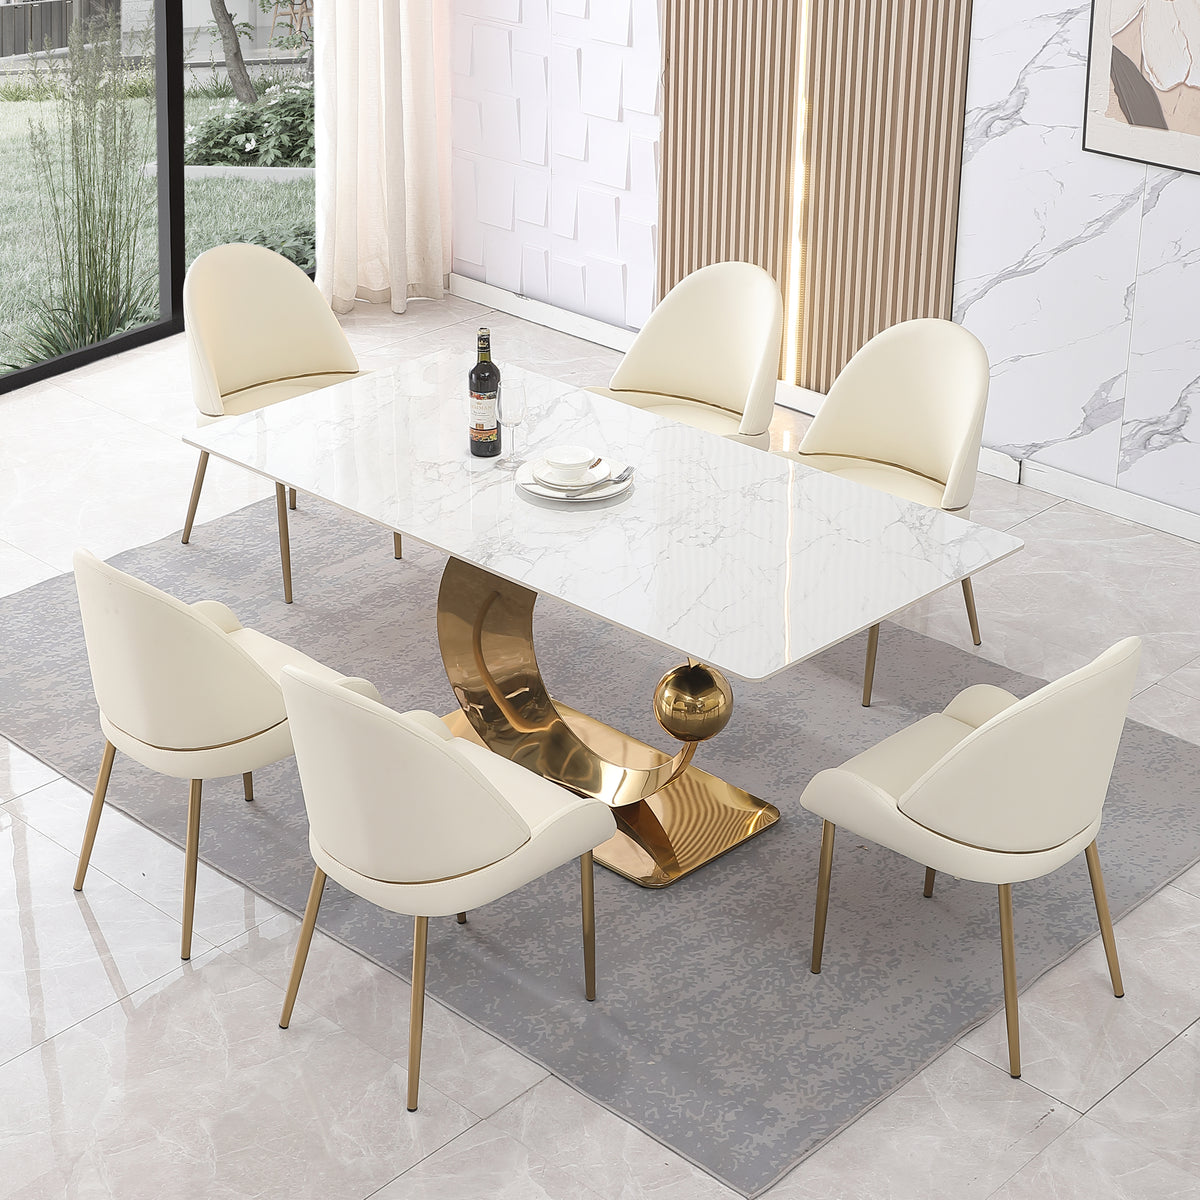 Dining Set 71-Inch Stone Dining Table with Carrara White Color with 6 Chairs